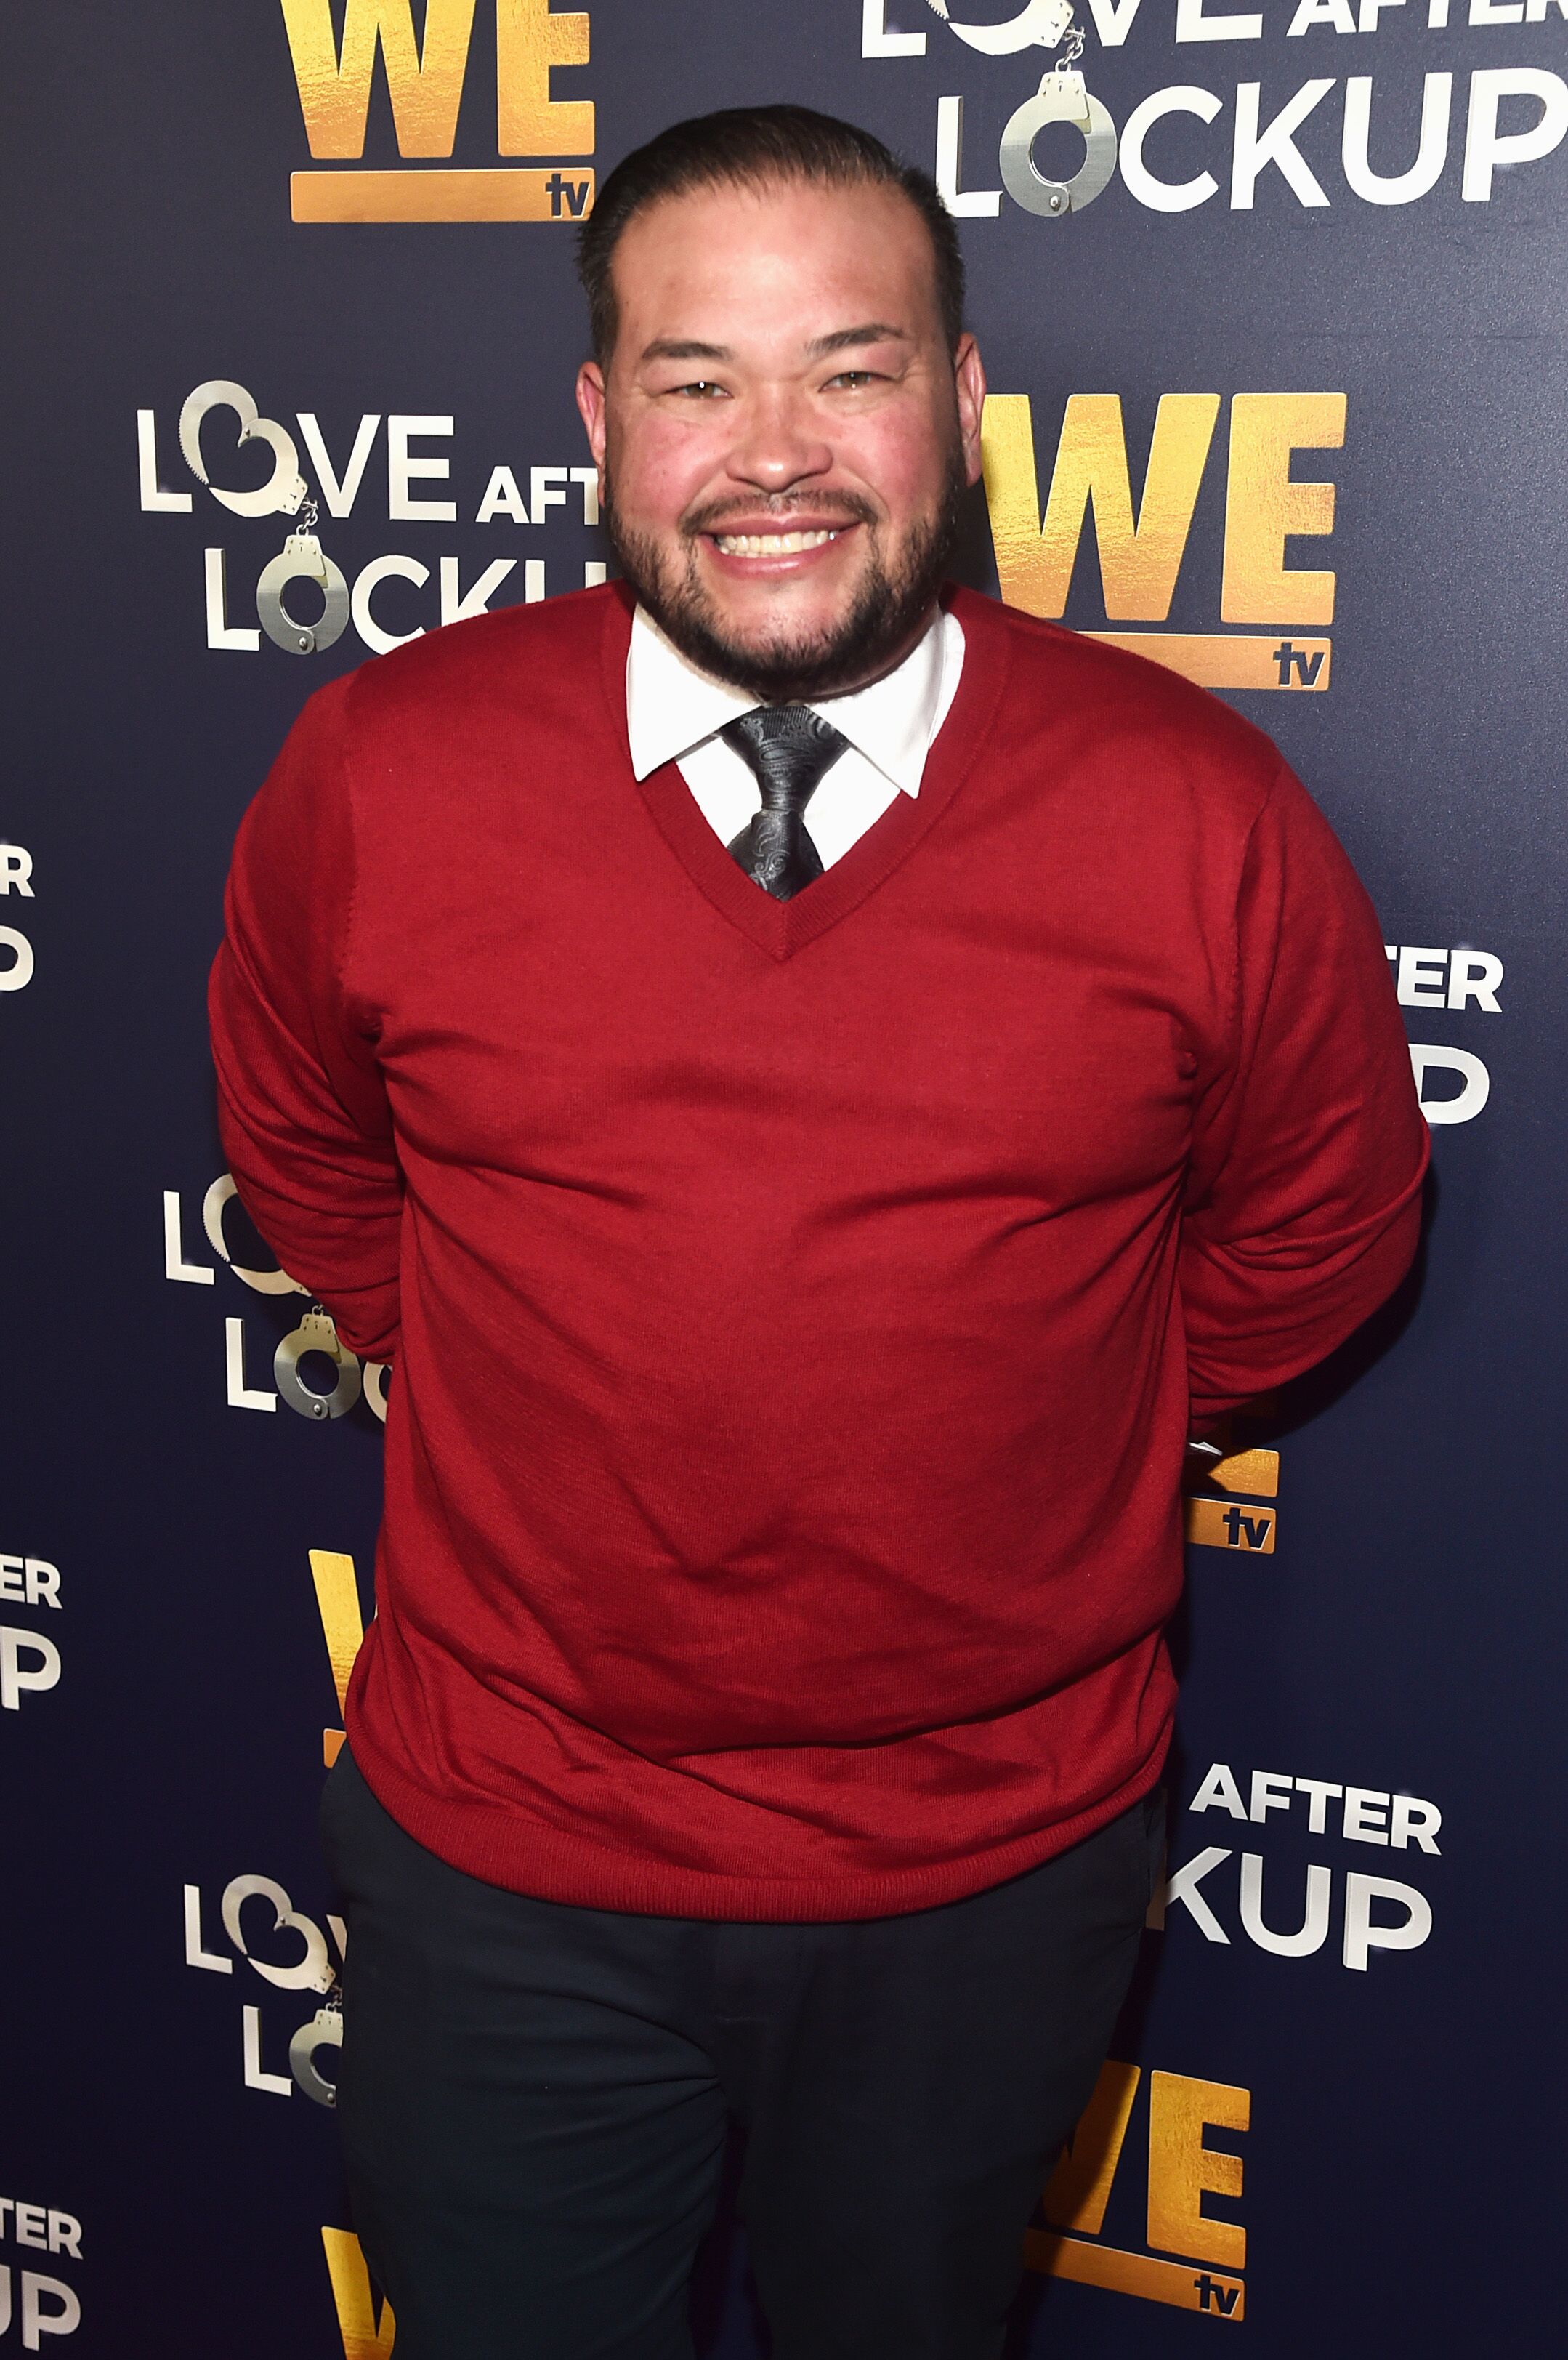 Jon Gosselin at WE tv on December 11, 2018, in Beverly Hills, California | Photo: Alberto E. Rodriguez/Getty Images